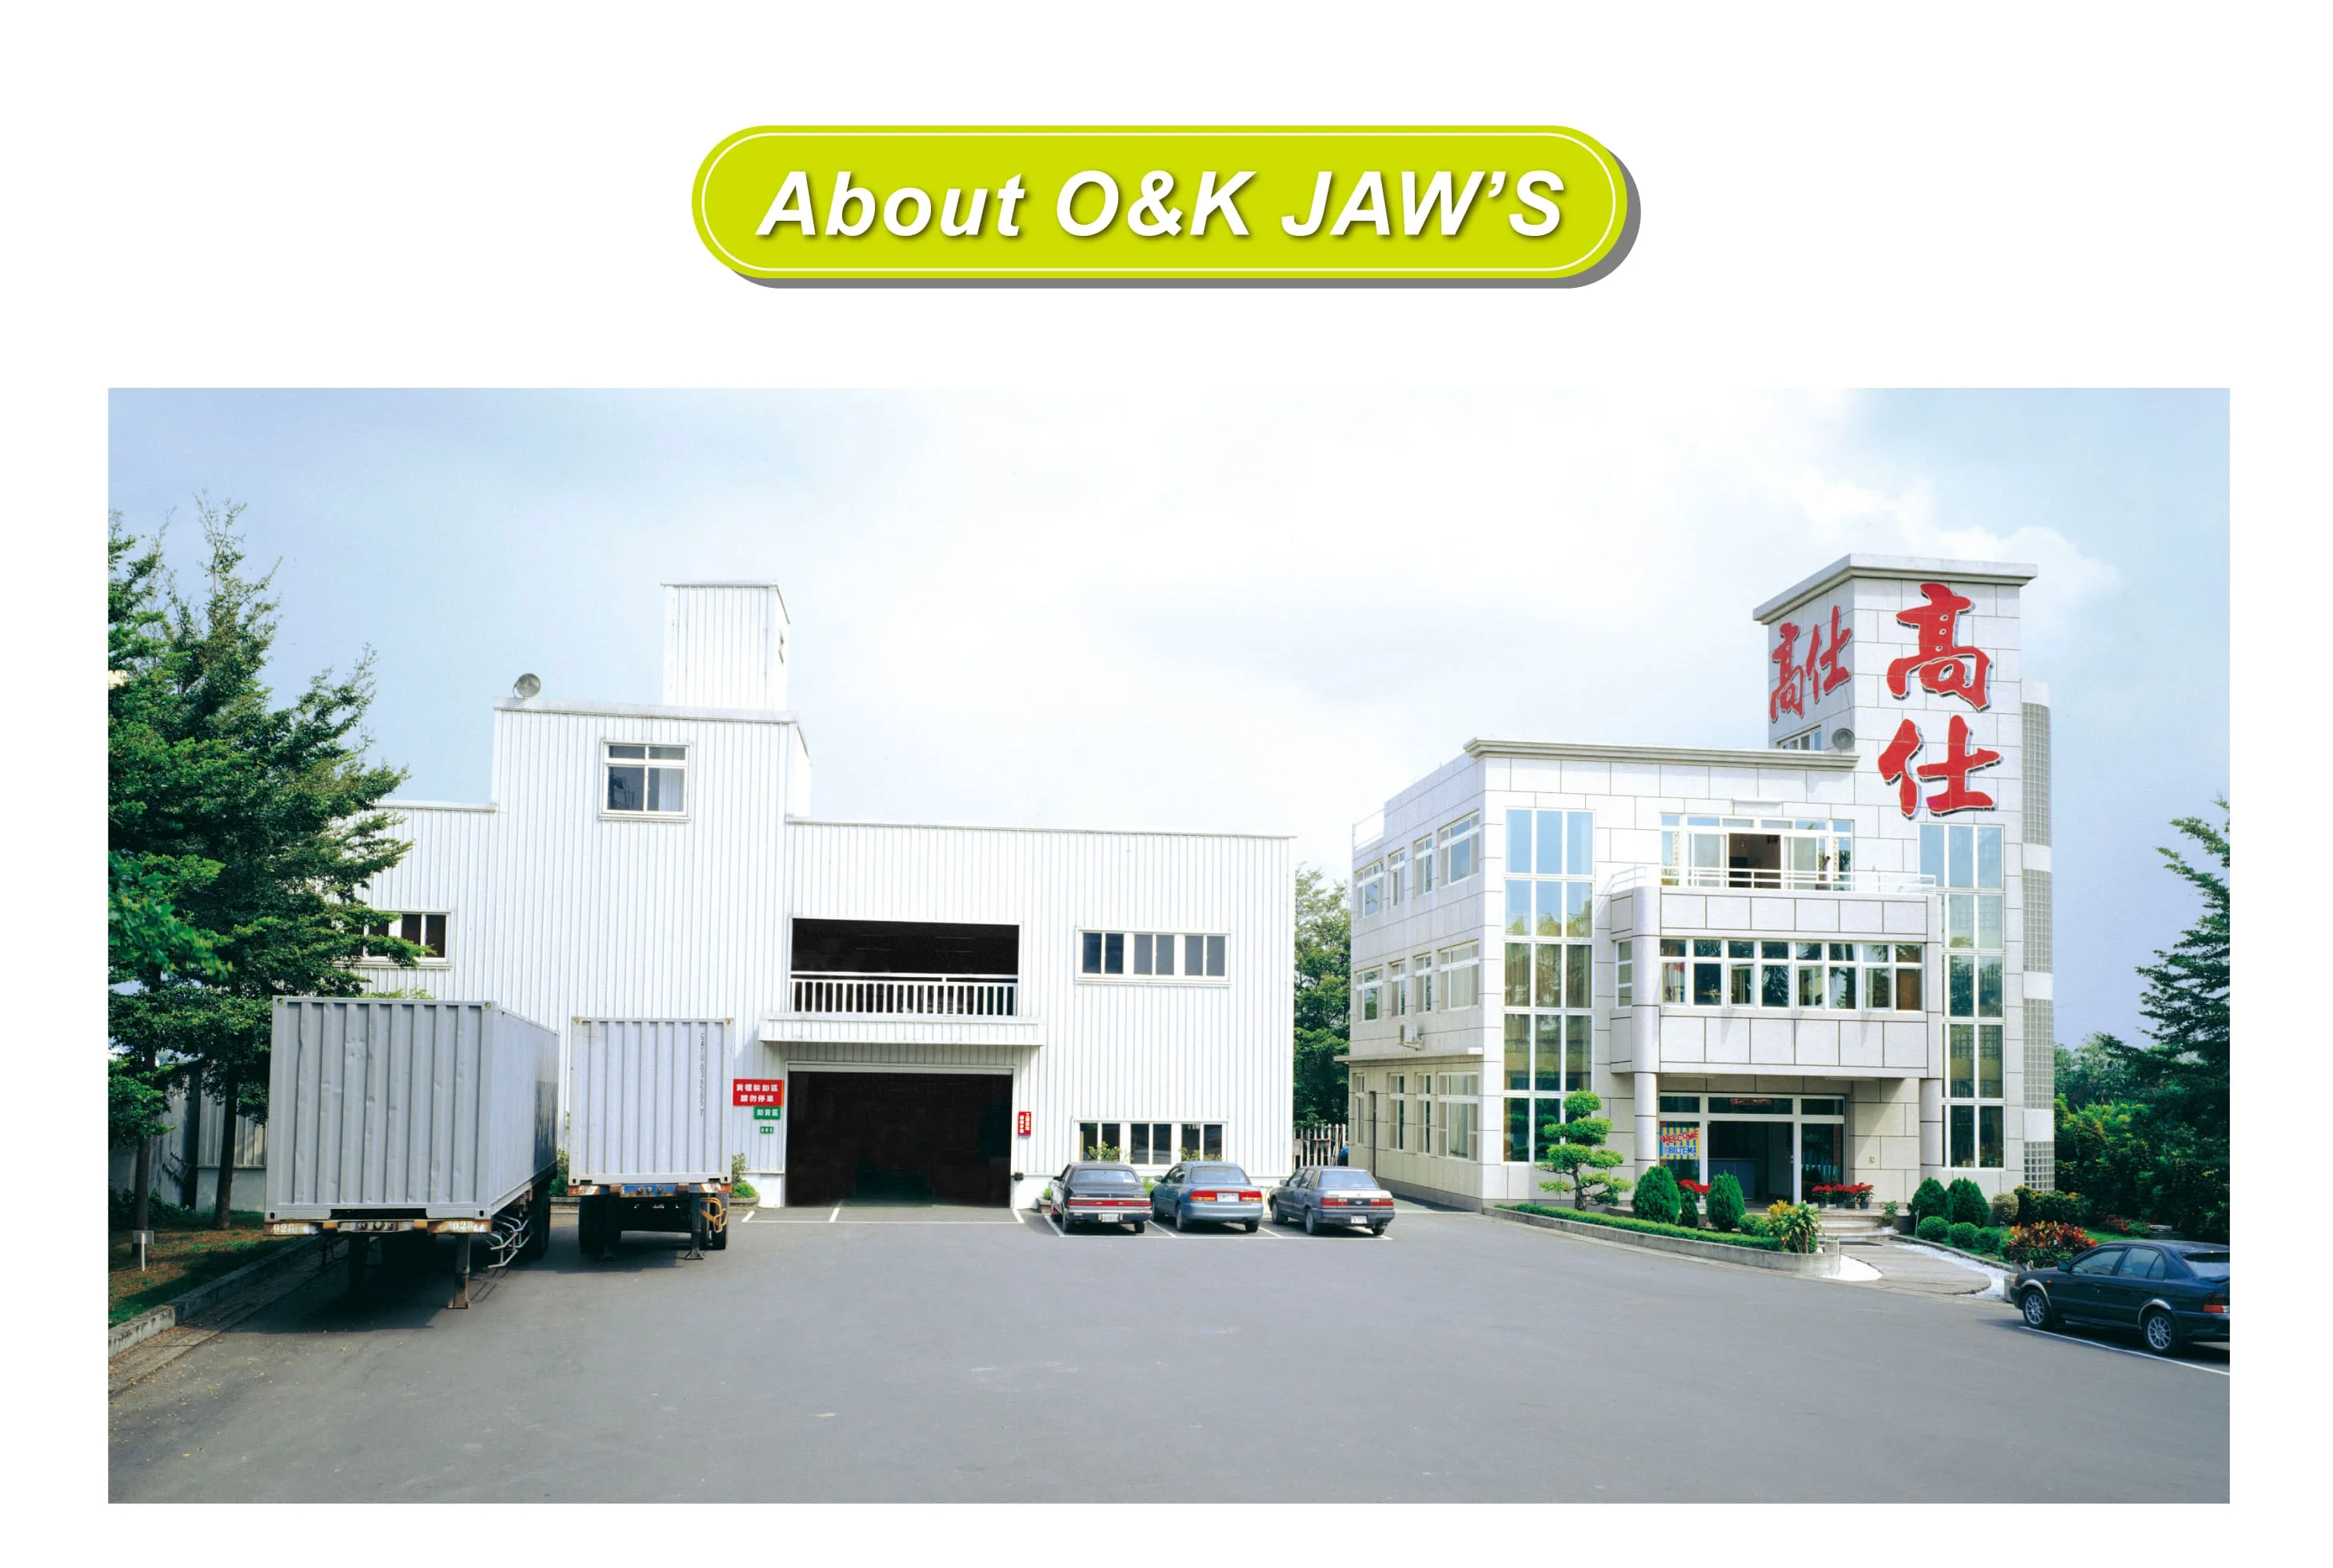 O & K JAWS CO. LTD. is founded in 1976 located in Taiwan, Hypersonic is our brand. All products make in Taiwan. O&K is one of the leading manufacturers in the Asian market that specializes in R&D, manufacturing, sales and OEM&ODM services for car accessories ( cell phone holder, Led light, hanger, antenna, blind spot mirror, USB car charger and power socket, etc.   40 years presence in the market substantiates O&K's continuous growth.  O&K has significantly expanded over the years. At present, Our company with an annual production capacity of 200,000 pieces and export to all over the world.